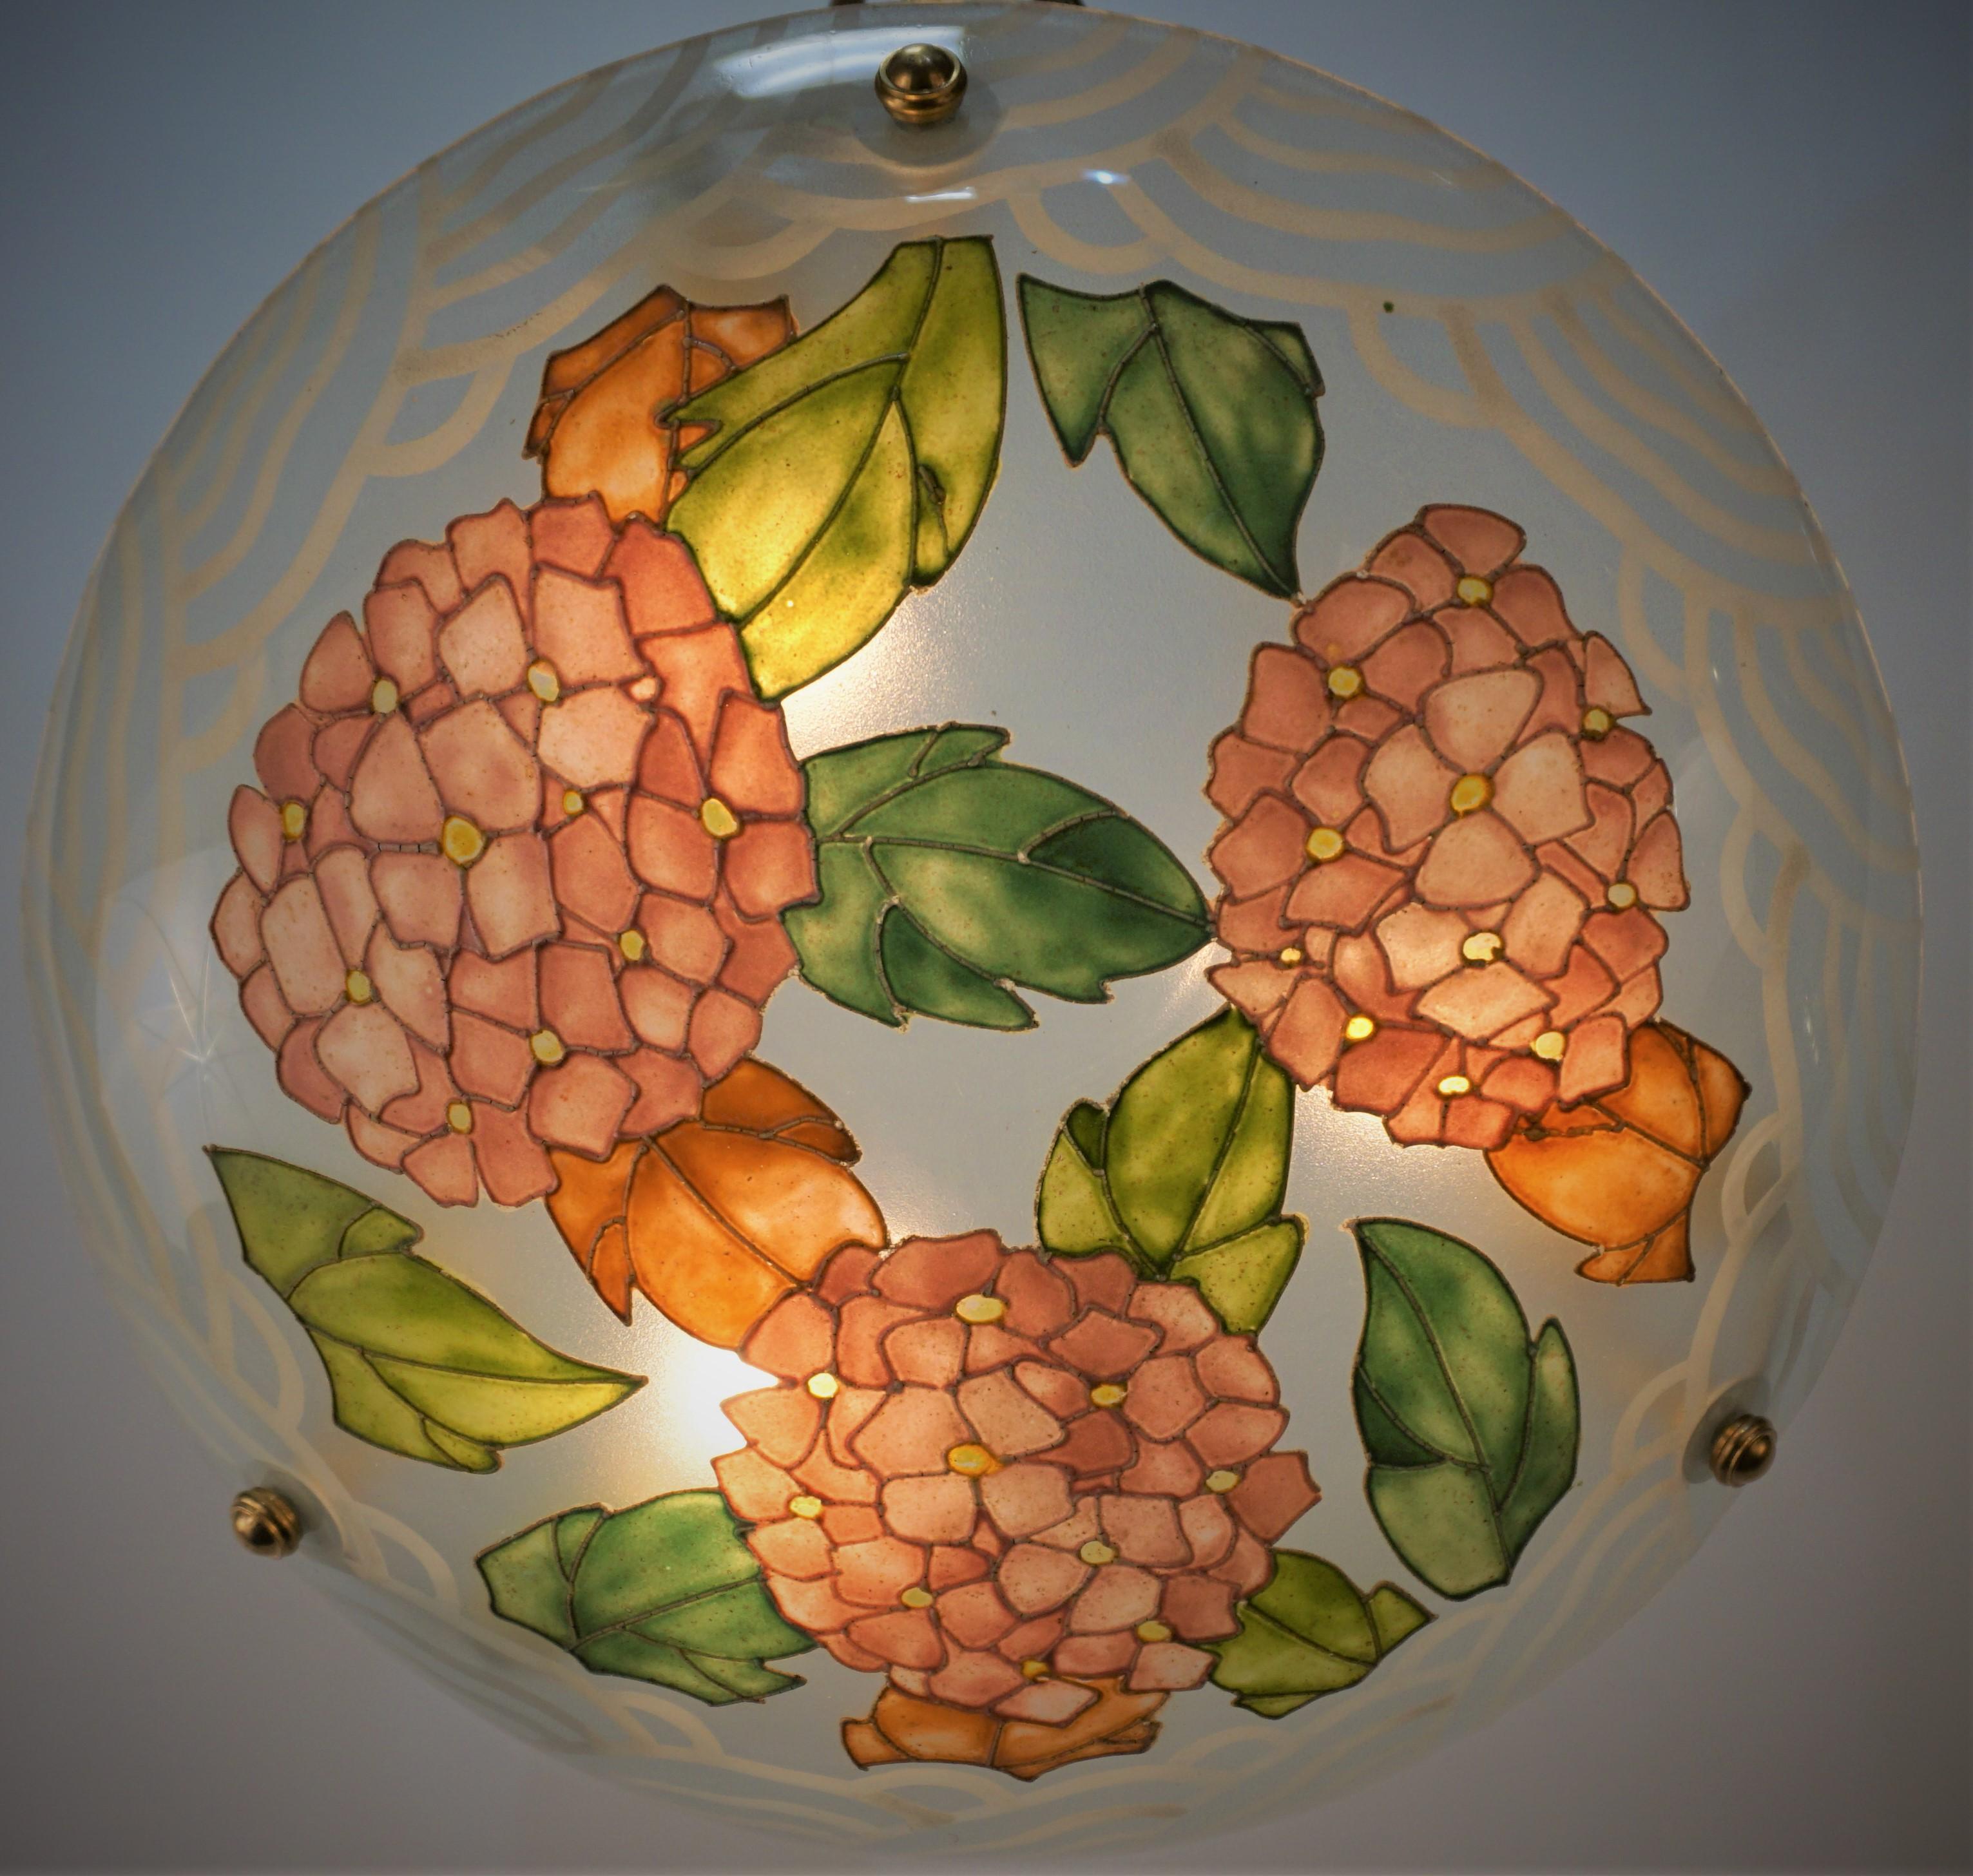 Heavy enameled geometric Hydrangea floral leaf pattern design painted over glass 1920's chandelier with handmade press brass chain and canopy.
Three lights 75watts max each.